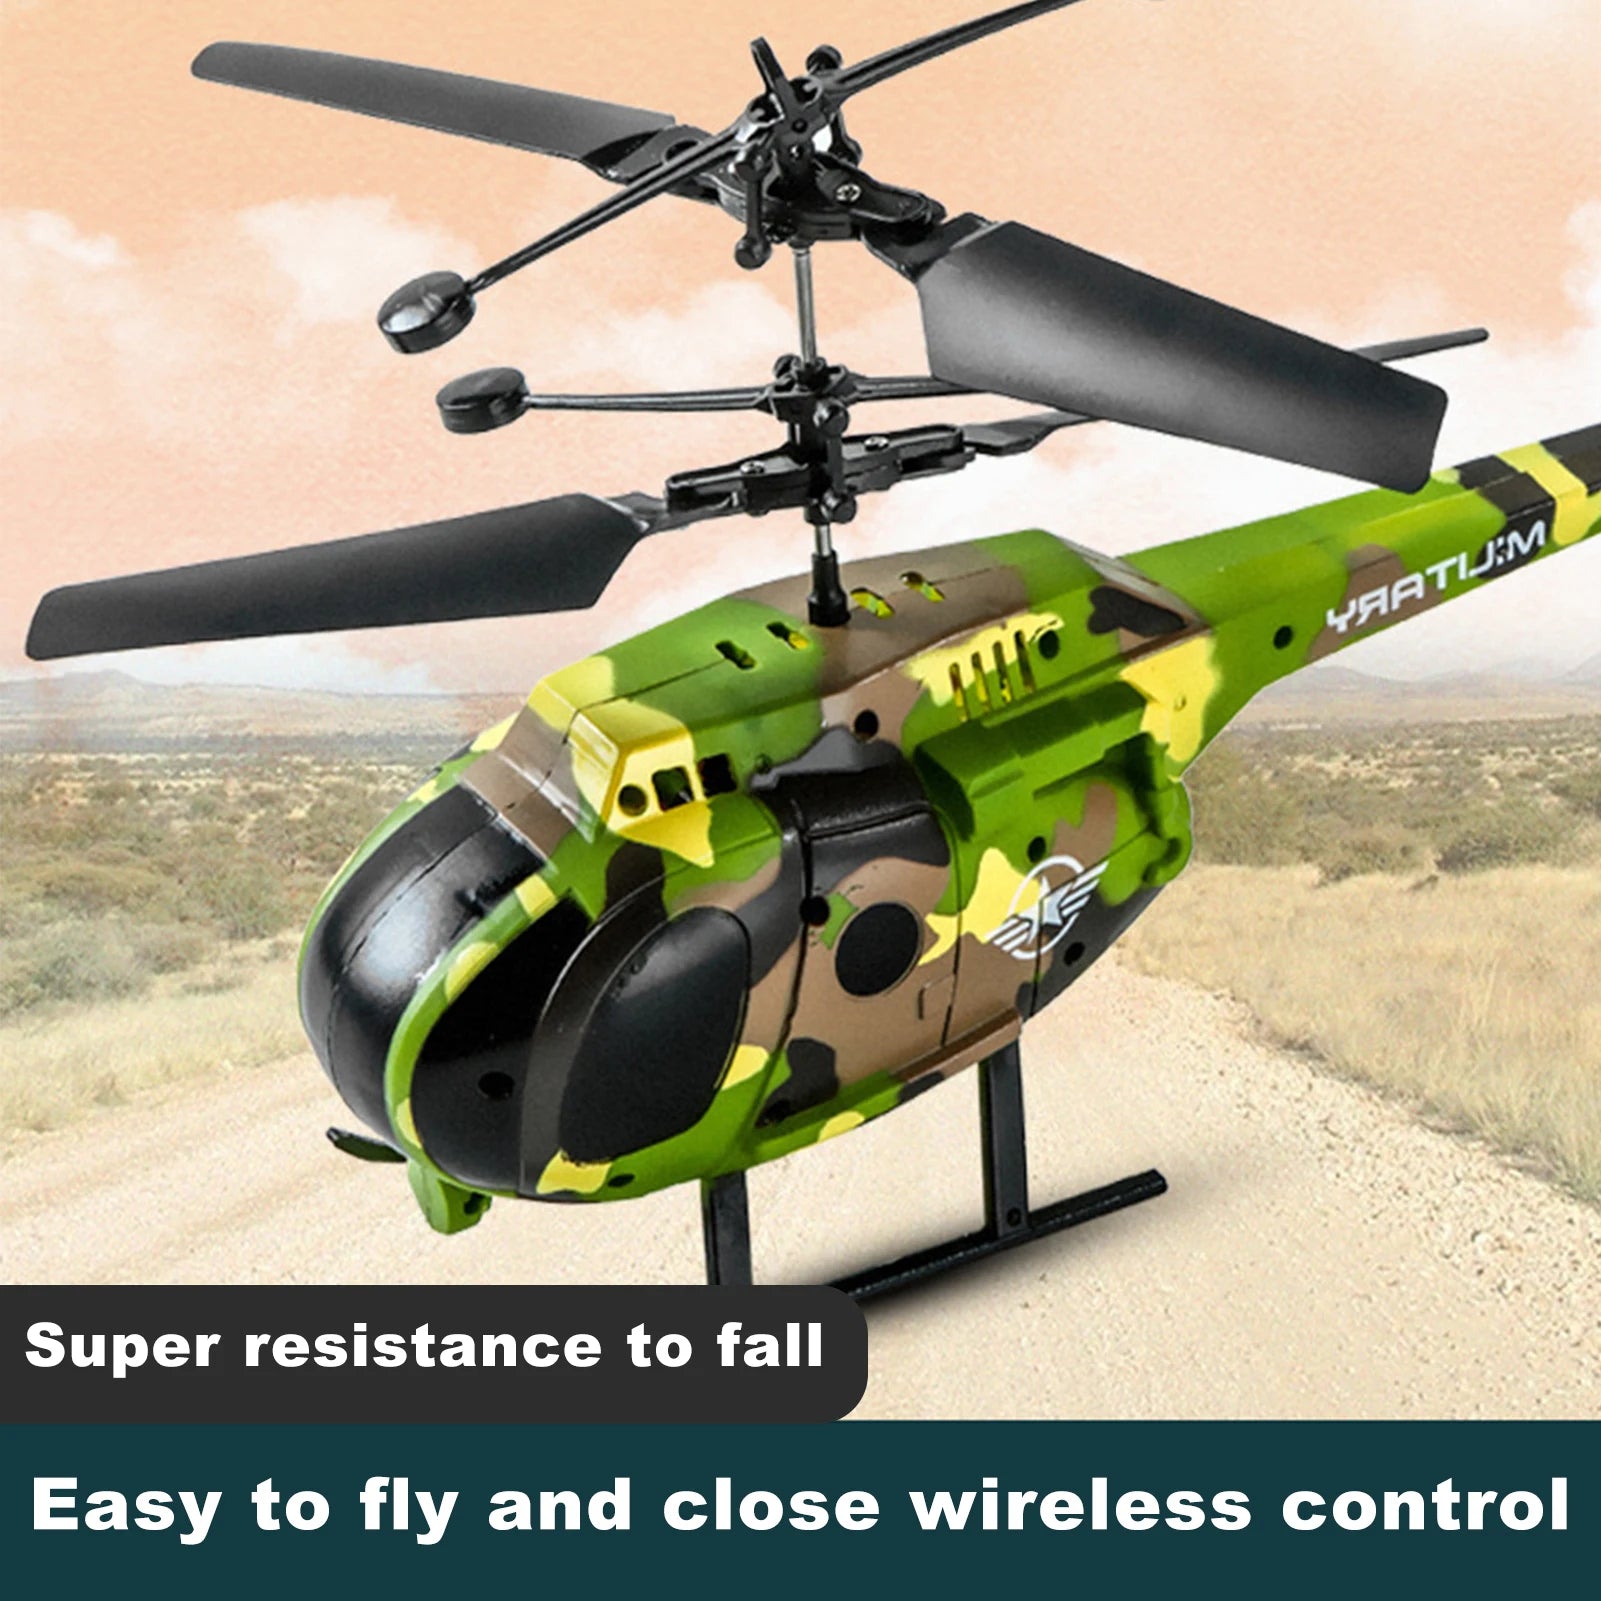 C135 RC Helicopter, Super resistance to fall Easy to and close wireless control UJ:M YAATI